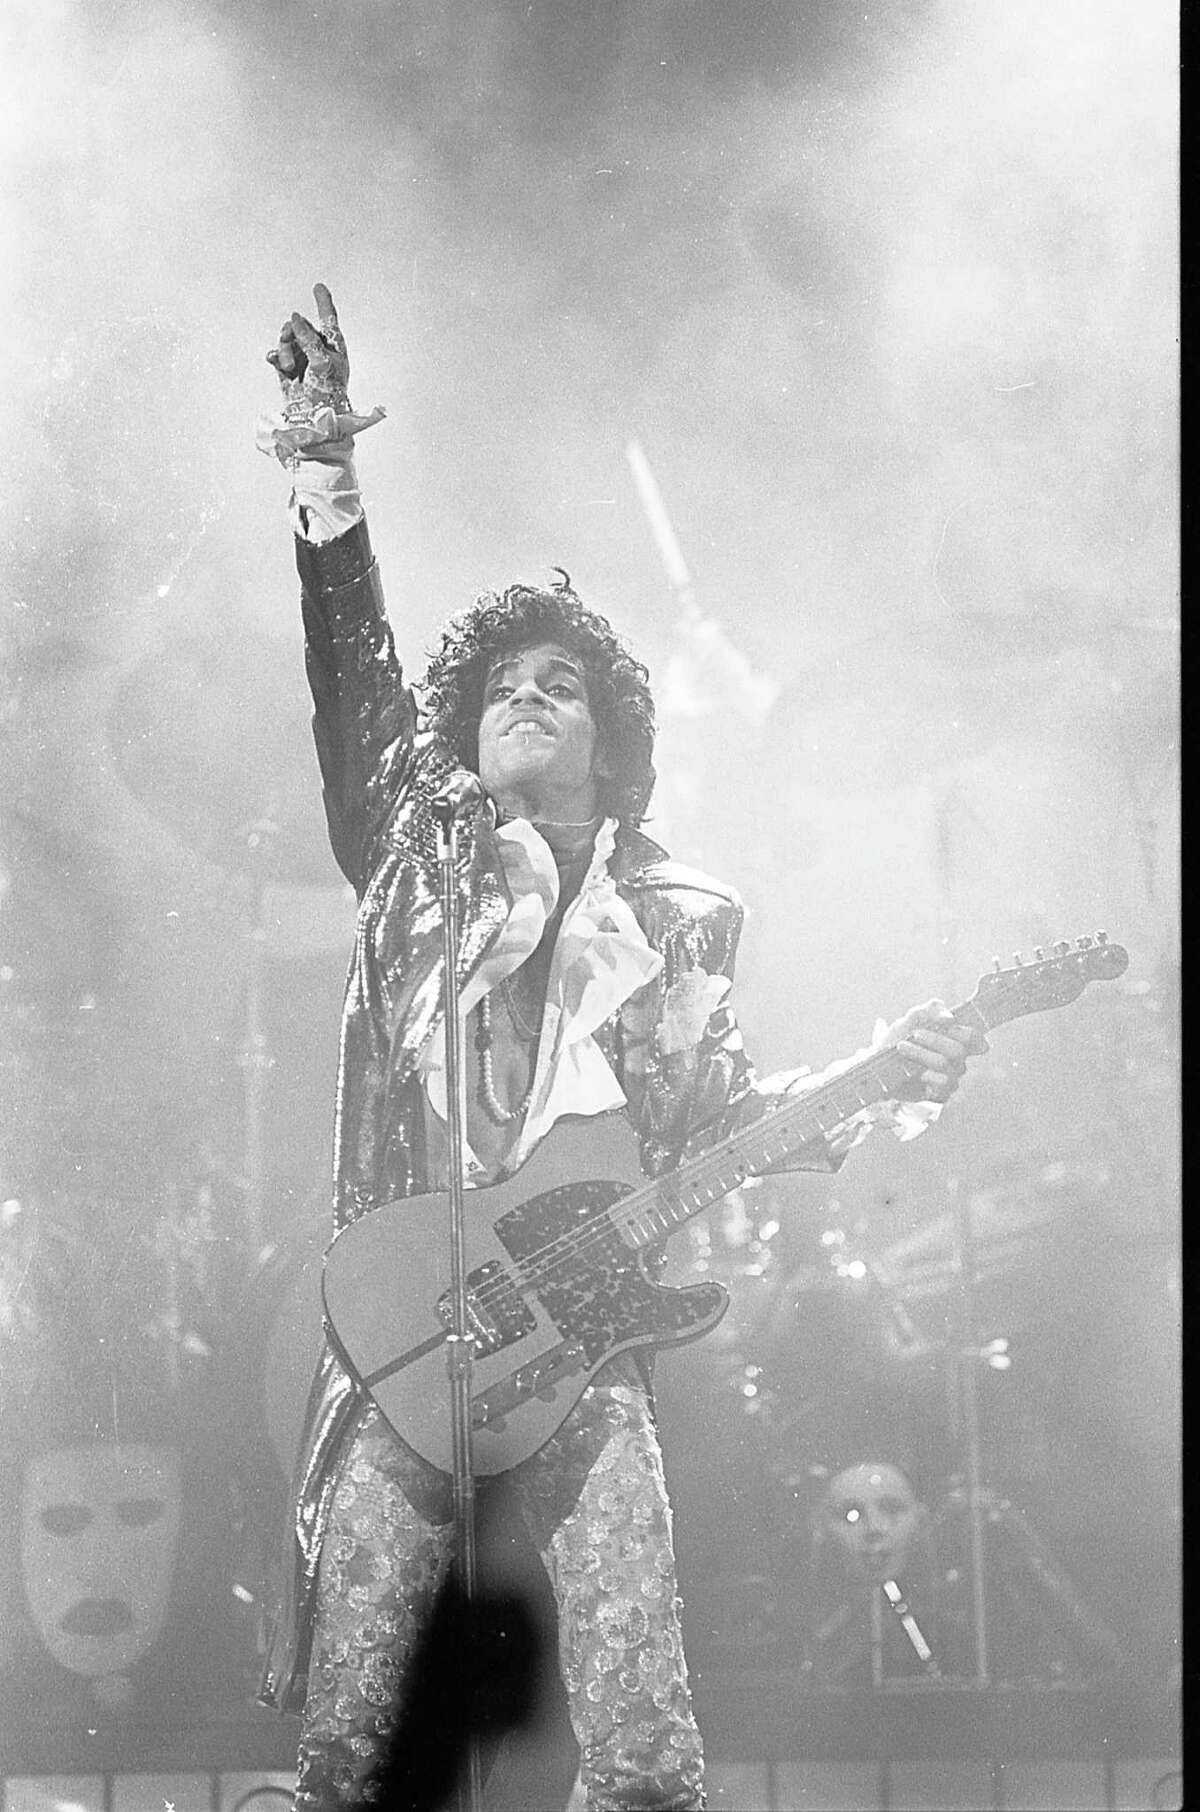 01/10/1985 - Prince performs Jan. 10, 1985, in the first of six concert appearances at the Summit. The Houston performances are part of the Purple Rain Tour and has sold-out the Summit for a record four nights.